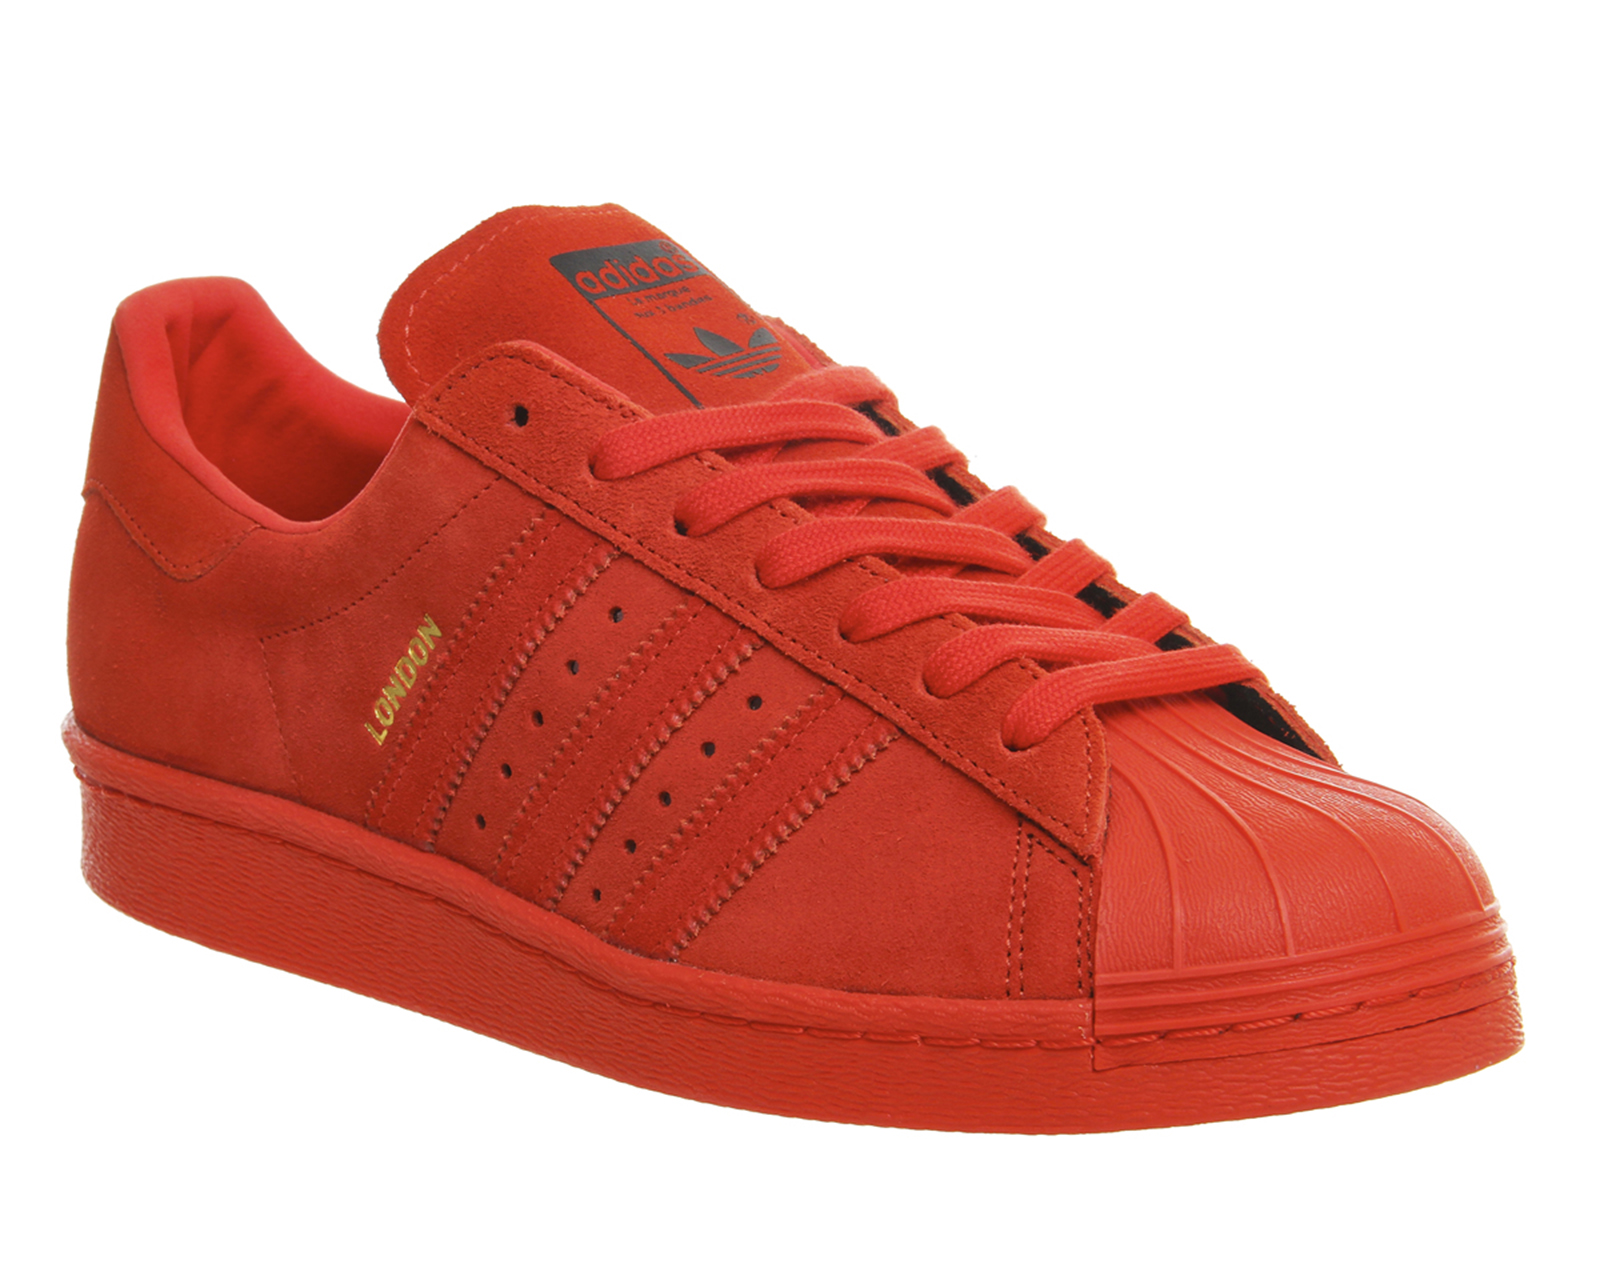 superstar 80s trainers city pack by adidas